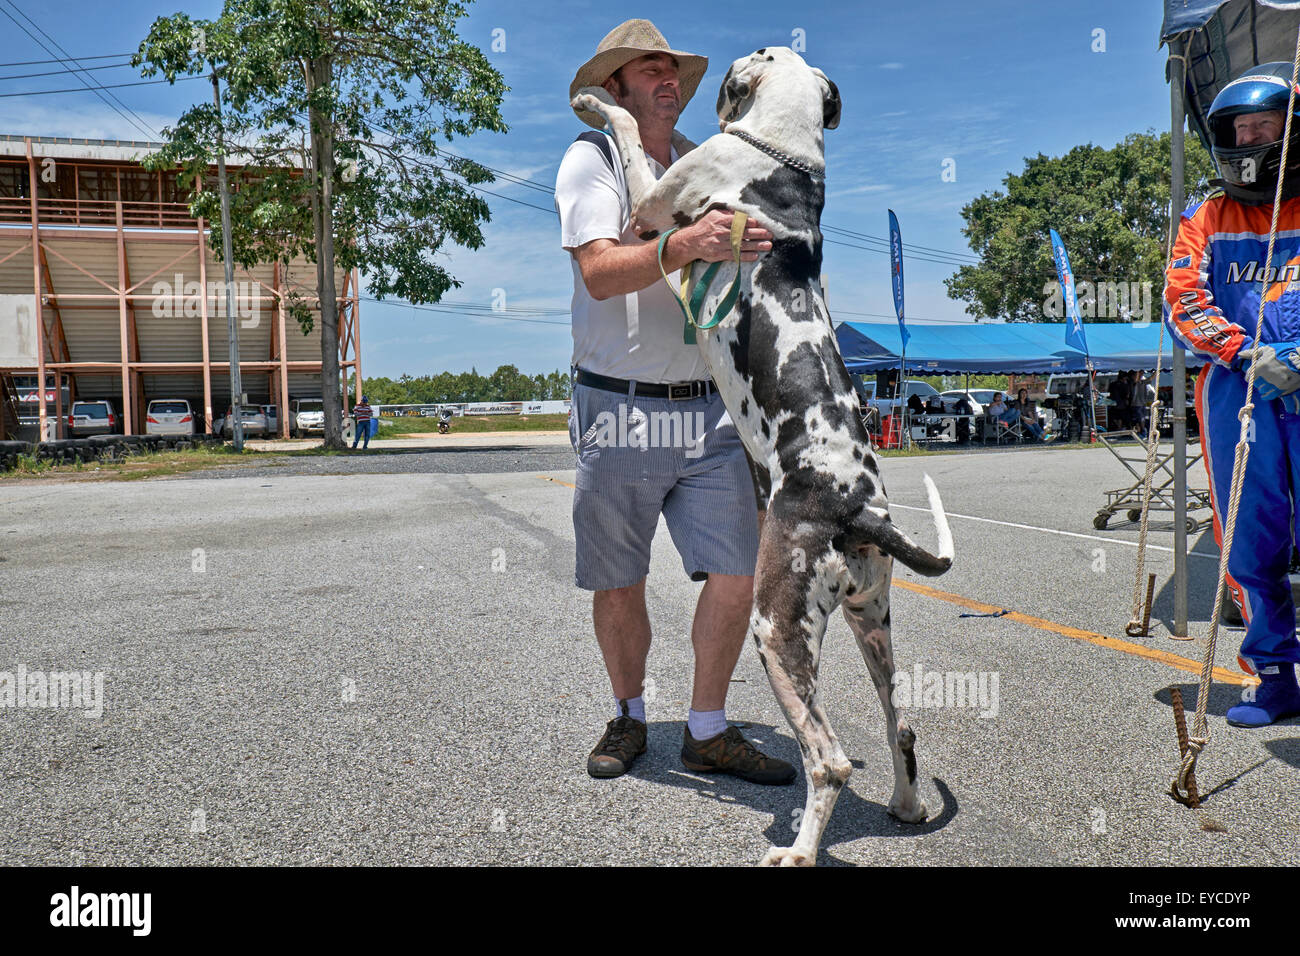 Great Dane Harlequin weighing 65 kilos and standing 2 metres tall affectionately greeting owner. Stock Photo